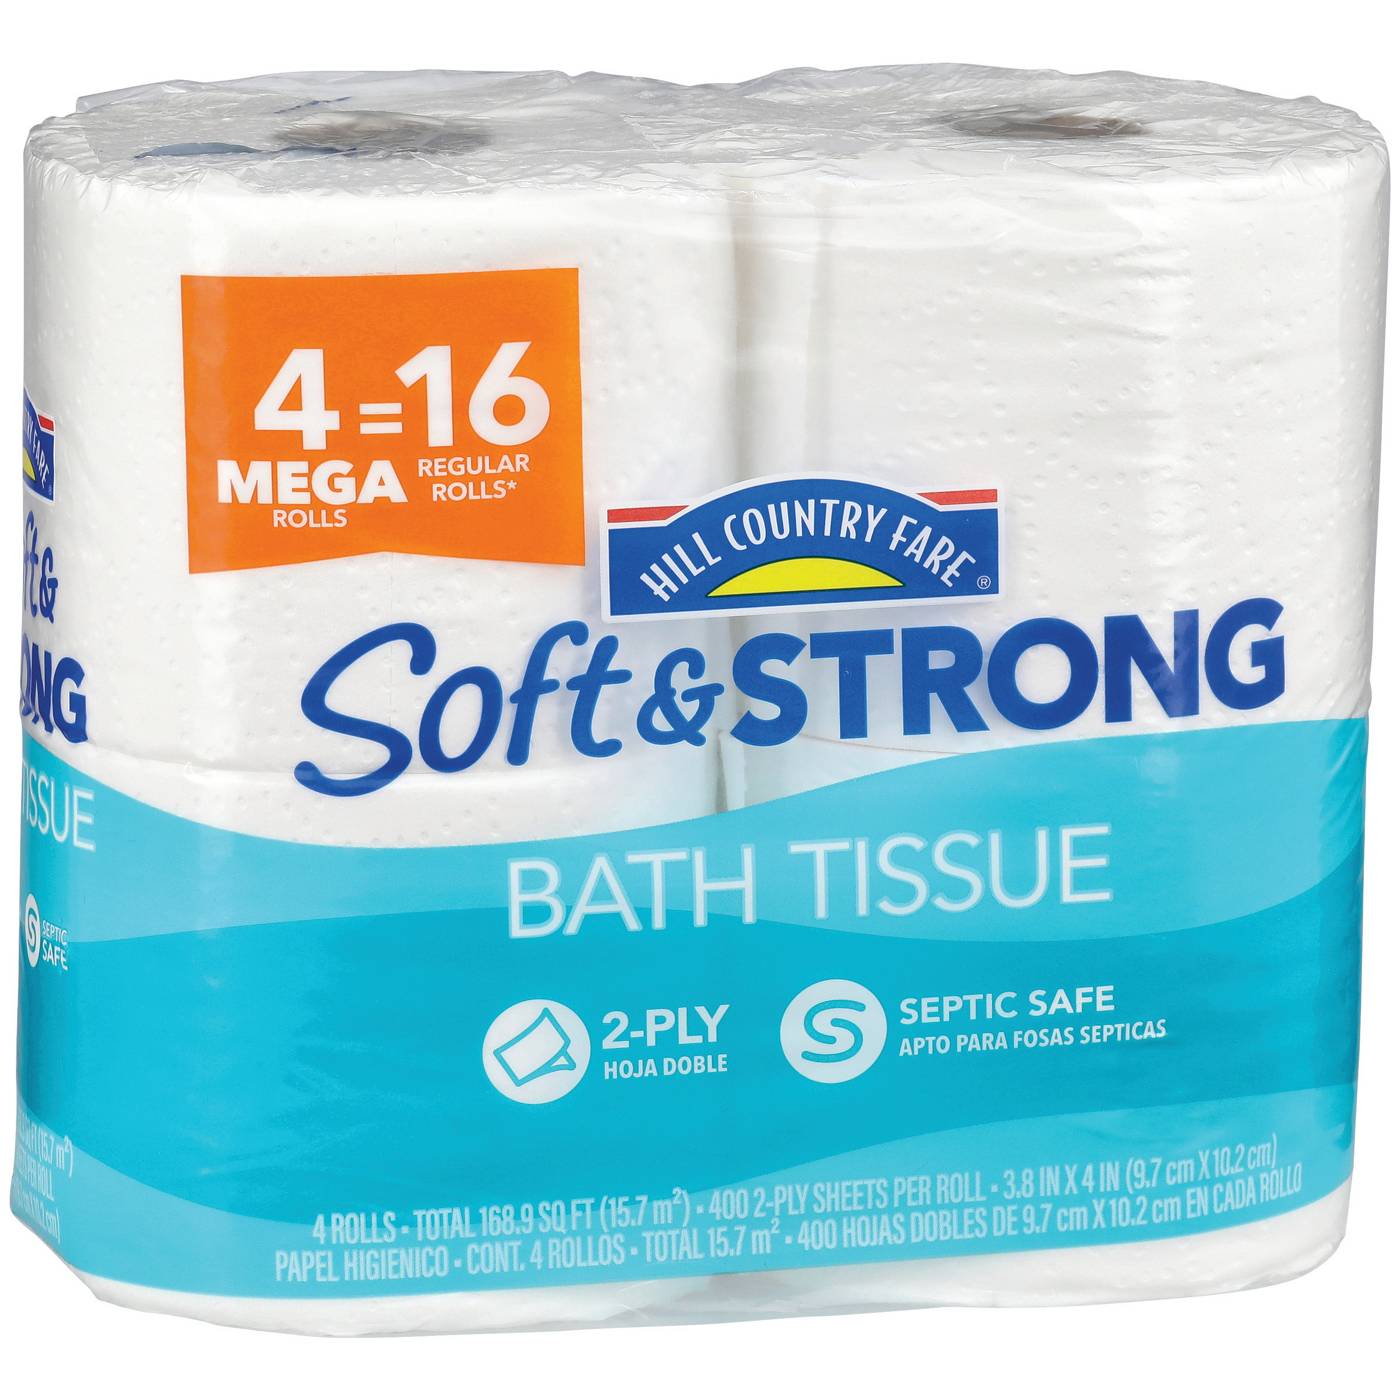 What Is The Softest Toilet Tissue Paper?